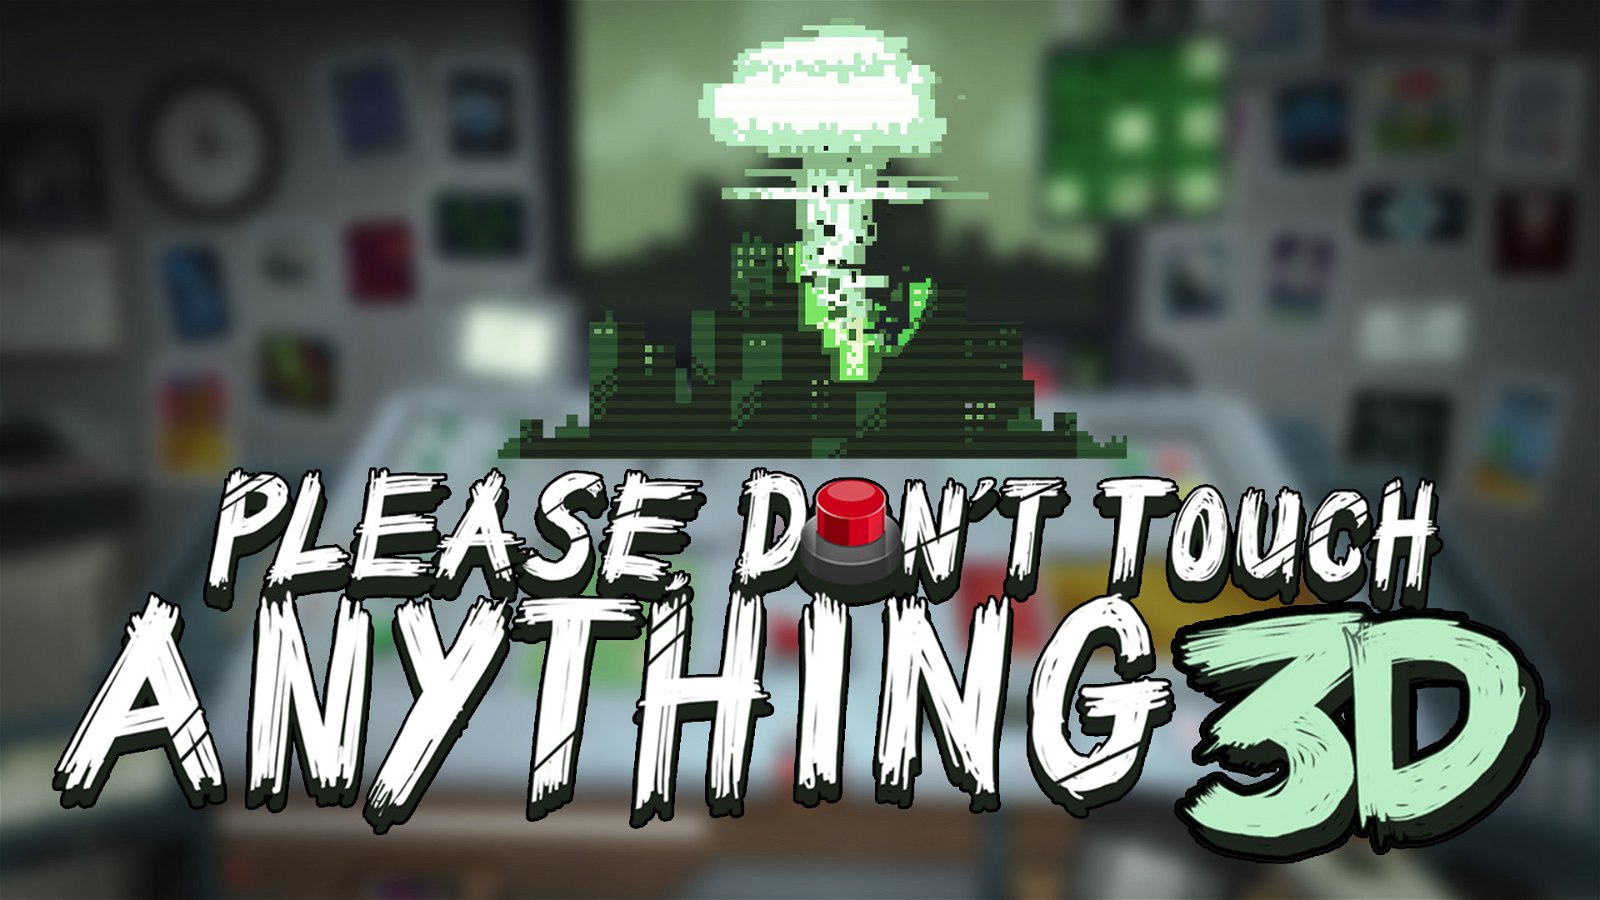 Image of Please, Don't Touch Anything 3D